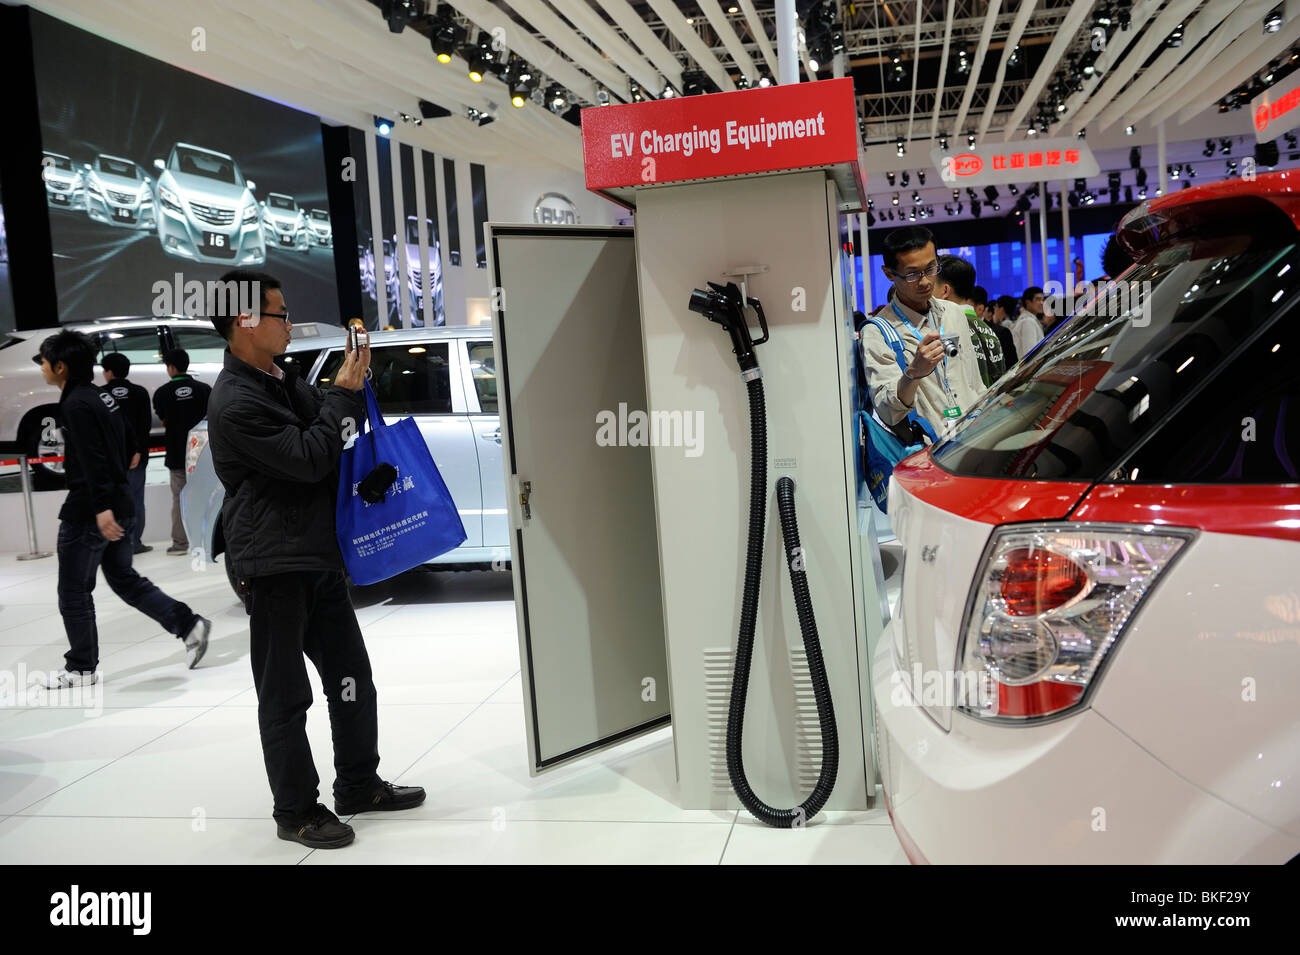 https://c8.alamy.com/comp/BKF29Y/ev-charging-equipment-is-displayed-at-byd-stand-at-the-beijing-auto-BKF29Y.jpg